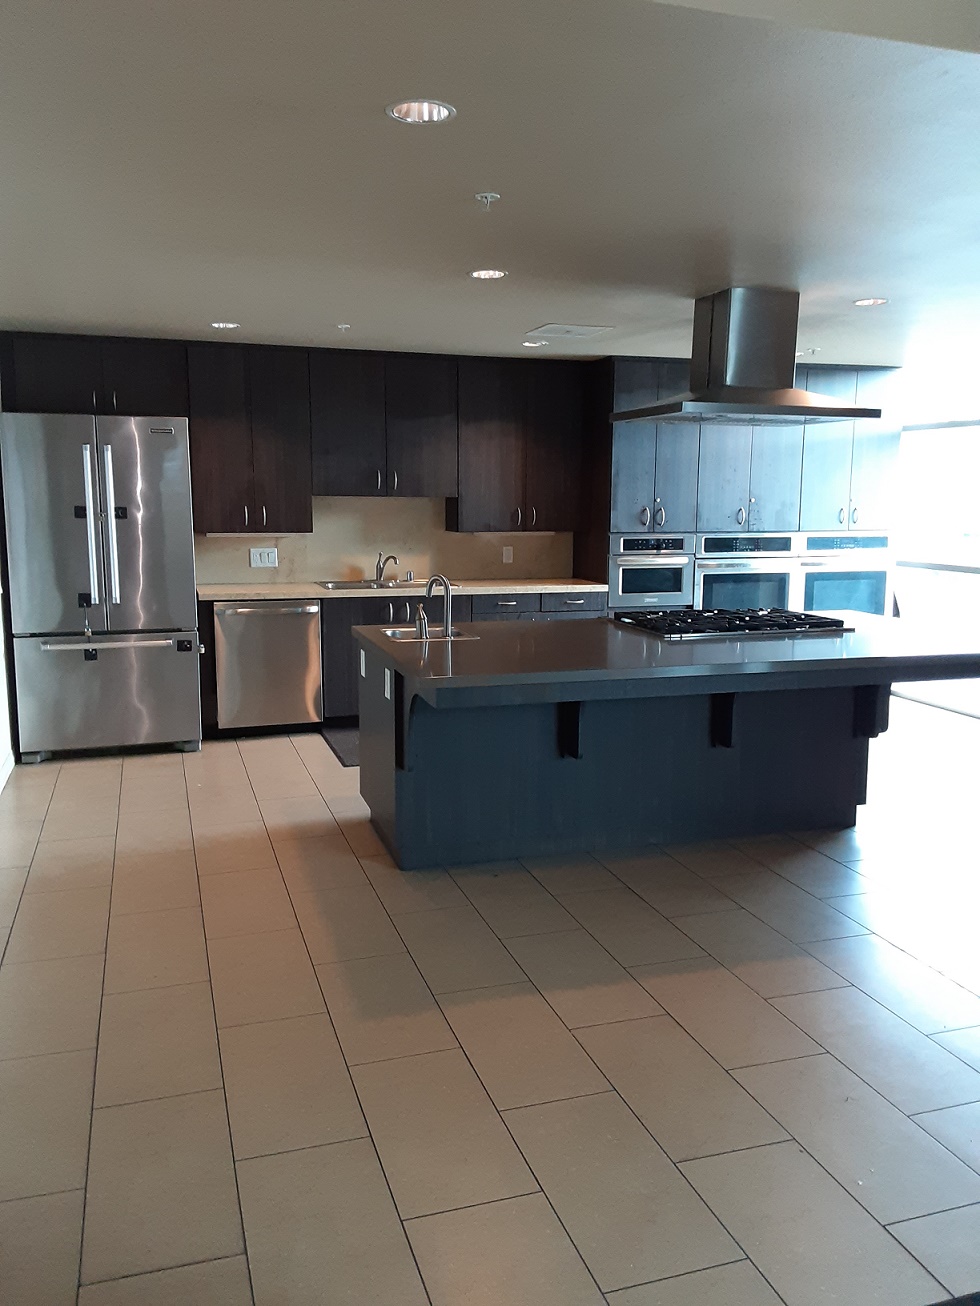 image of gateways kitchen area. large kitchen with upper and lower cabinets. appliances include but not limited to over, dish washer, and fridge.